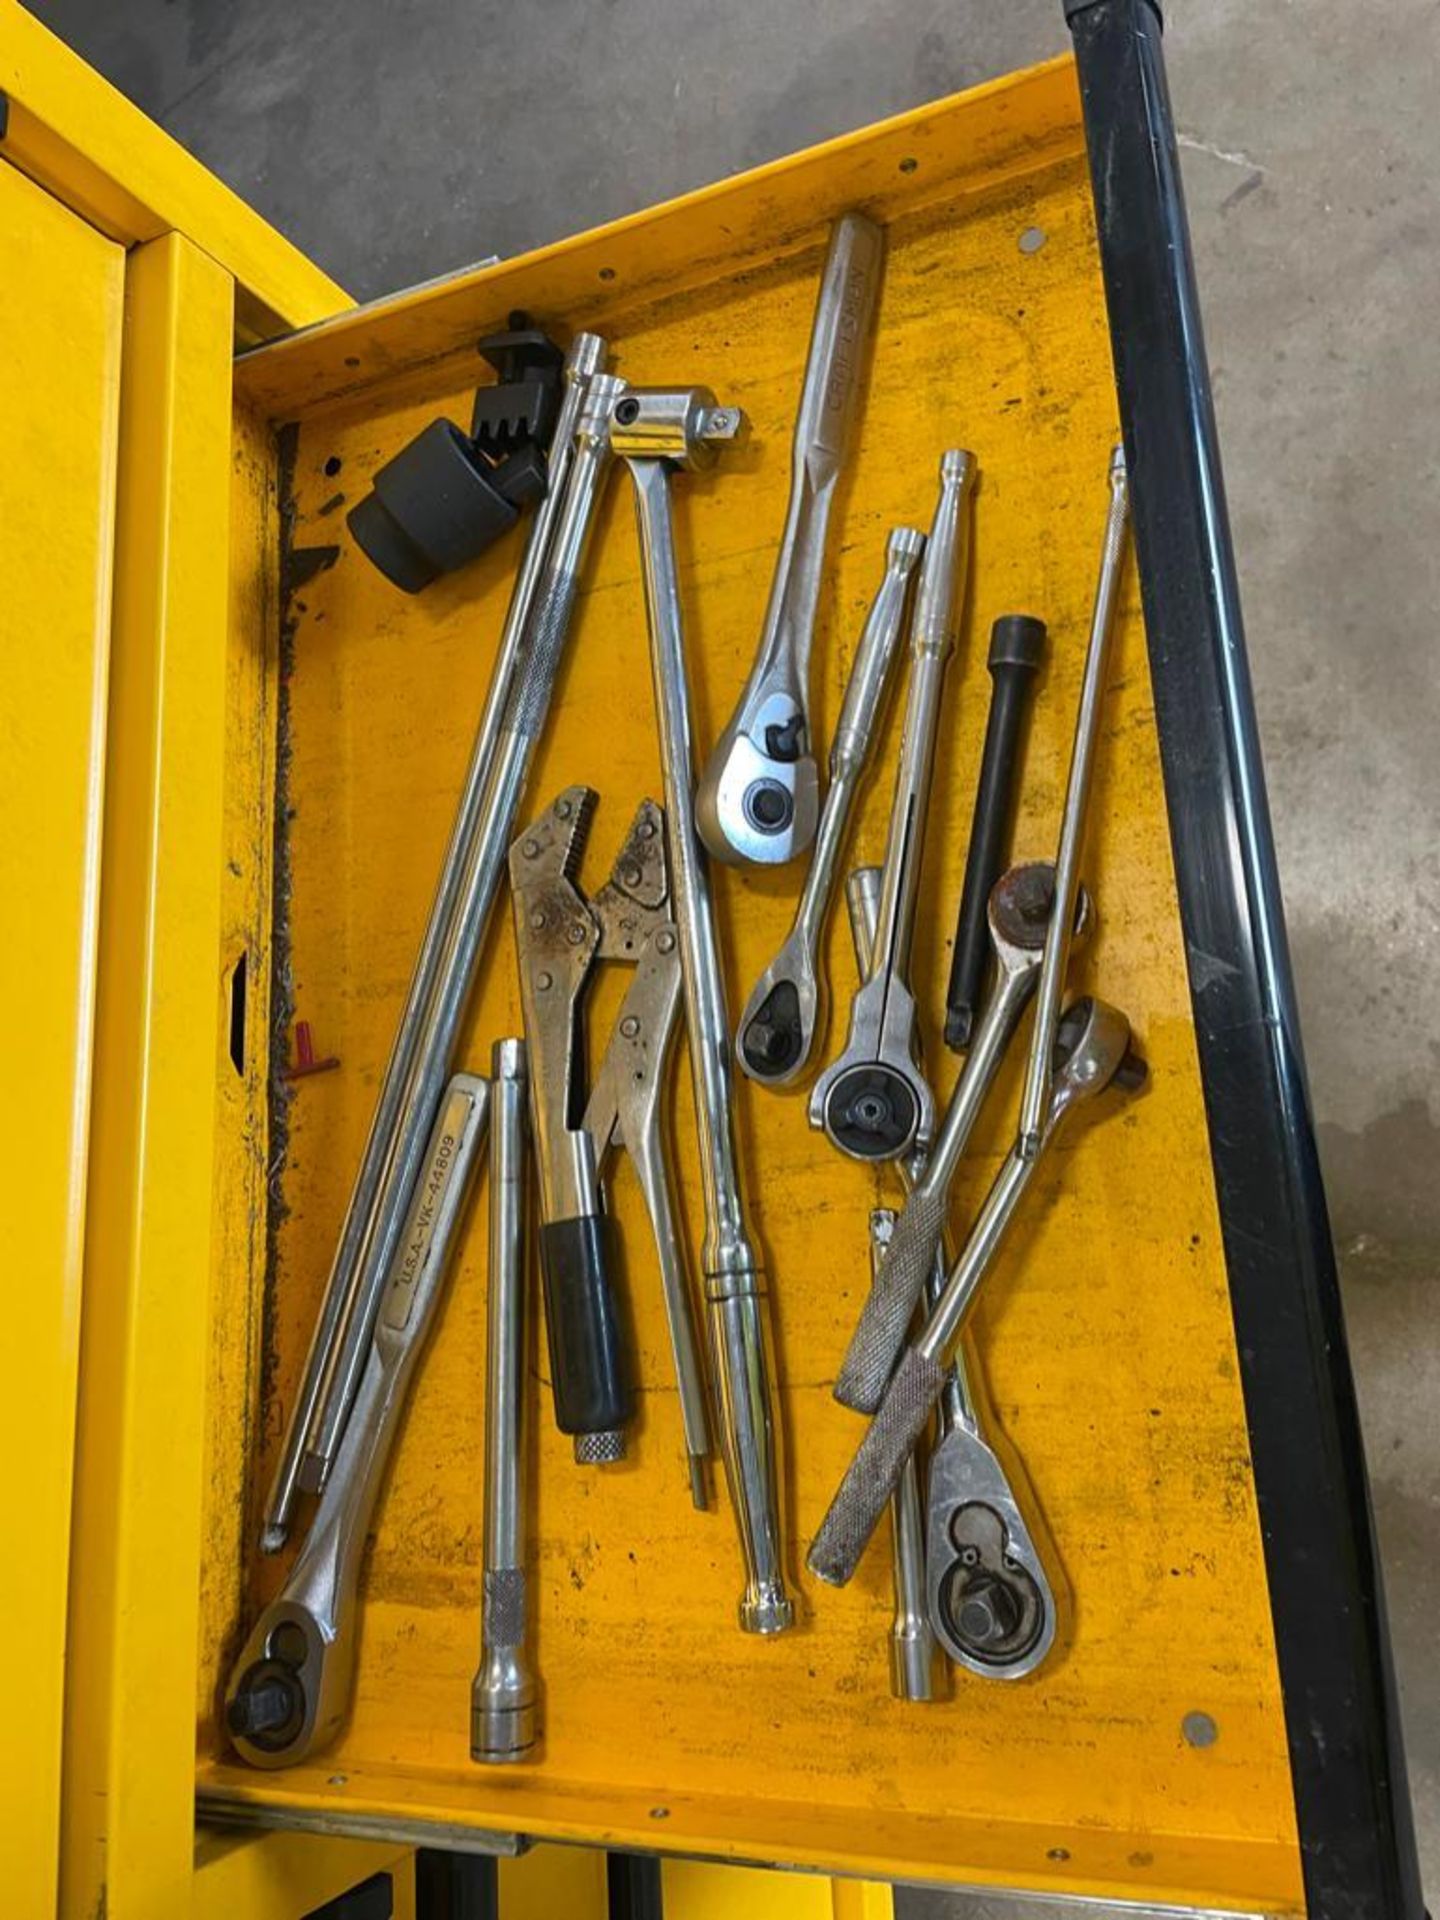 DeWalt Mechanics Tool Box with Contents, Wrenches, Sockets, Plyers, Pipe Wrench, Screwdrivers, etc. - Image 19 of 24